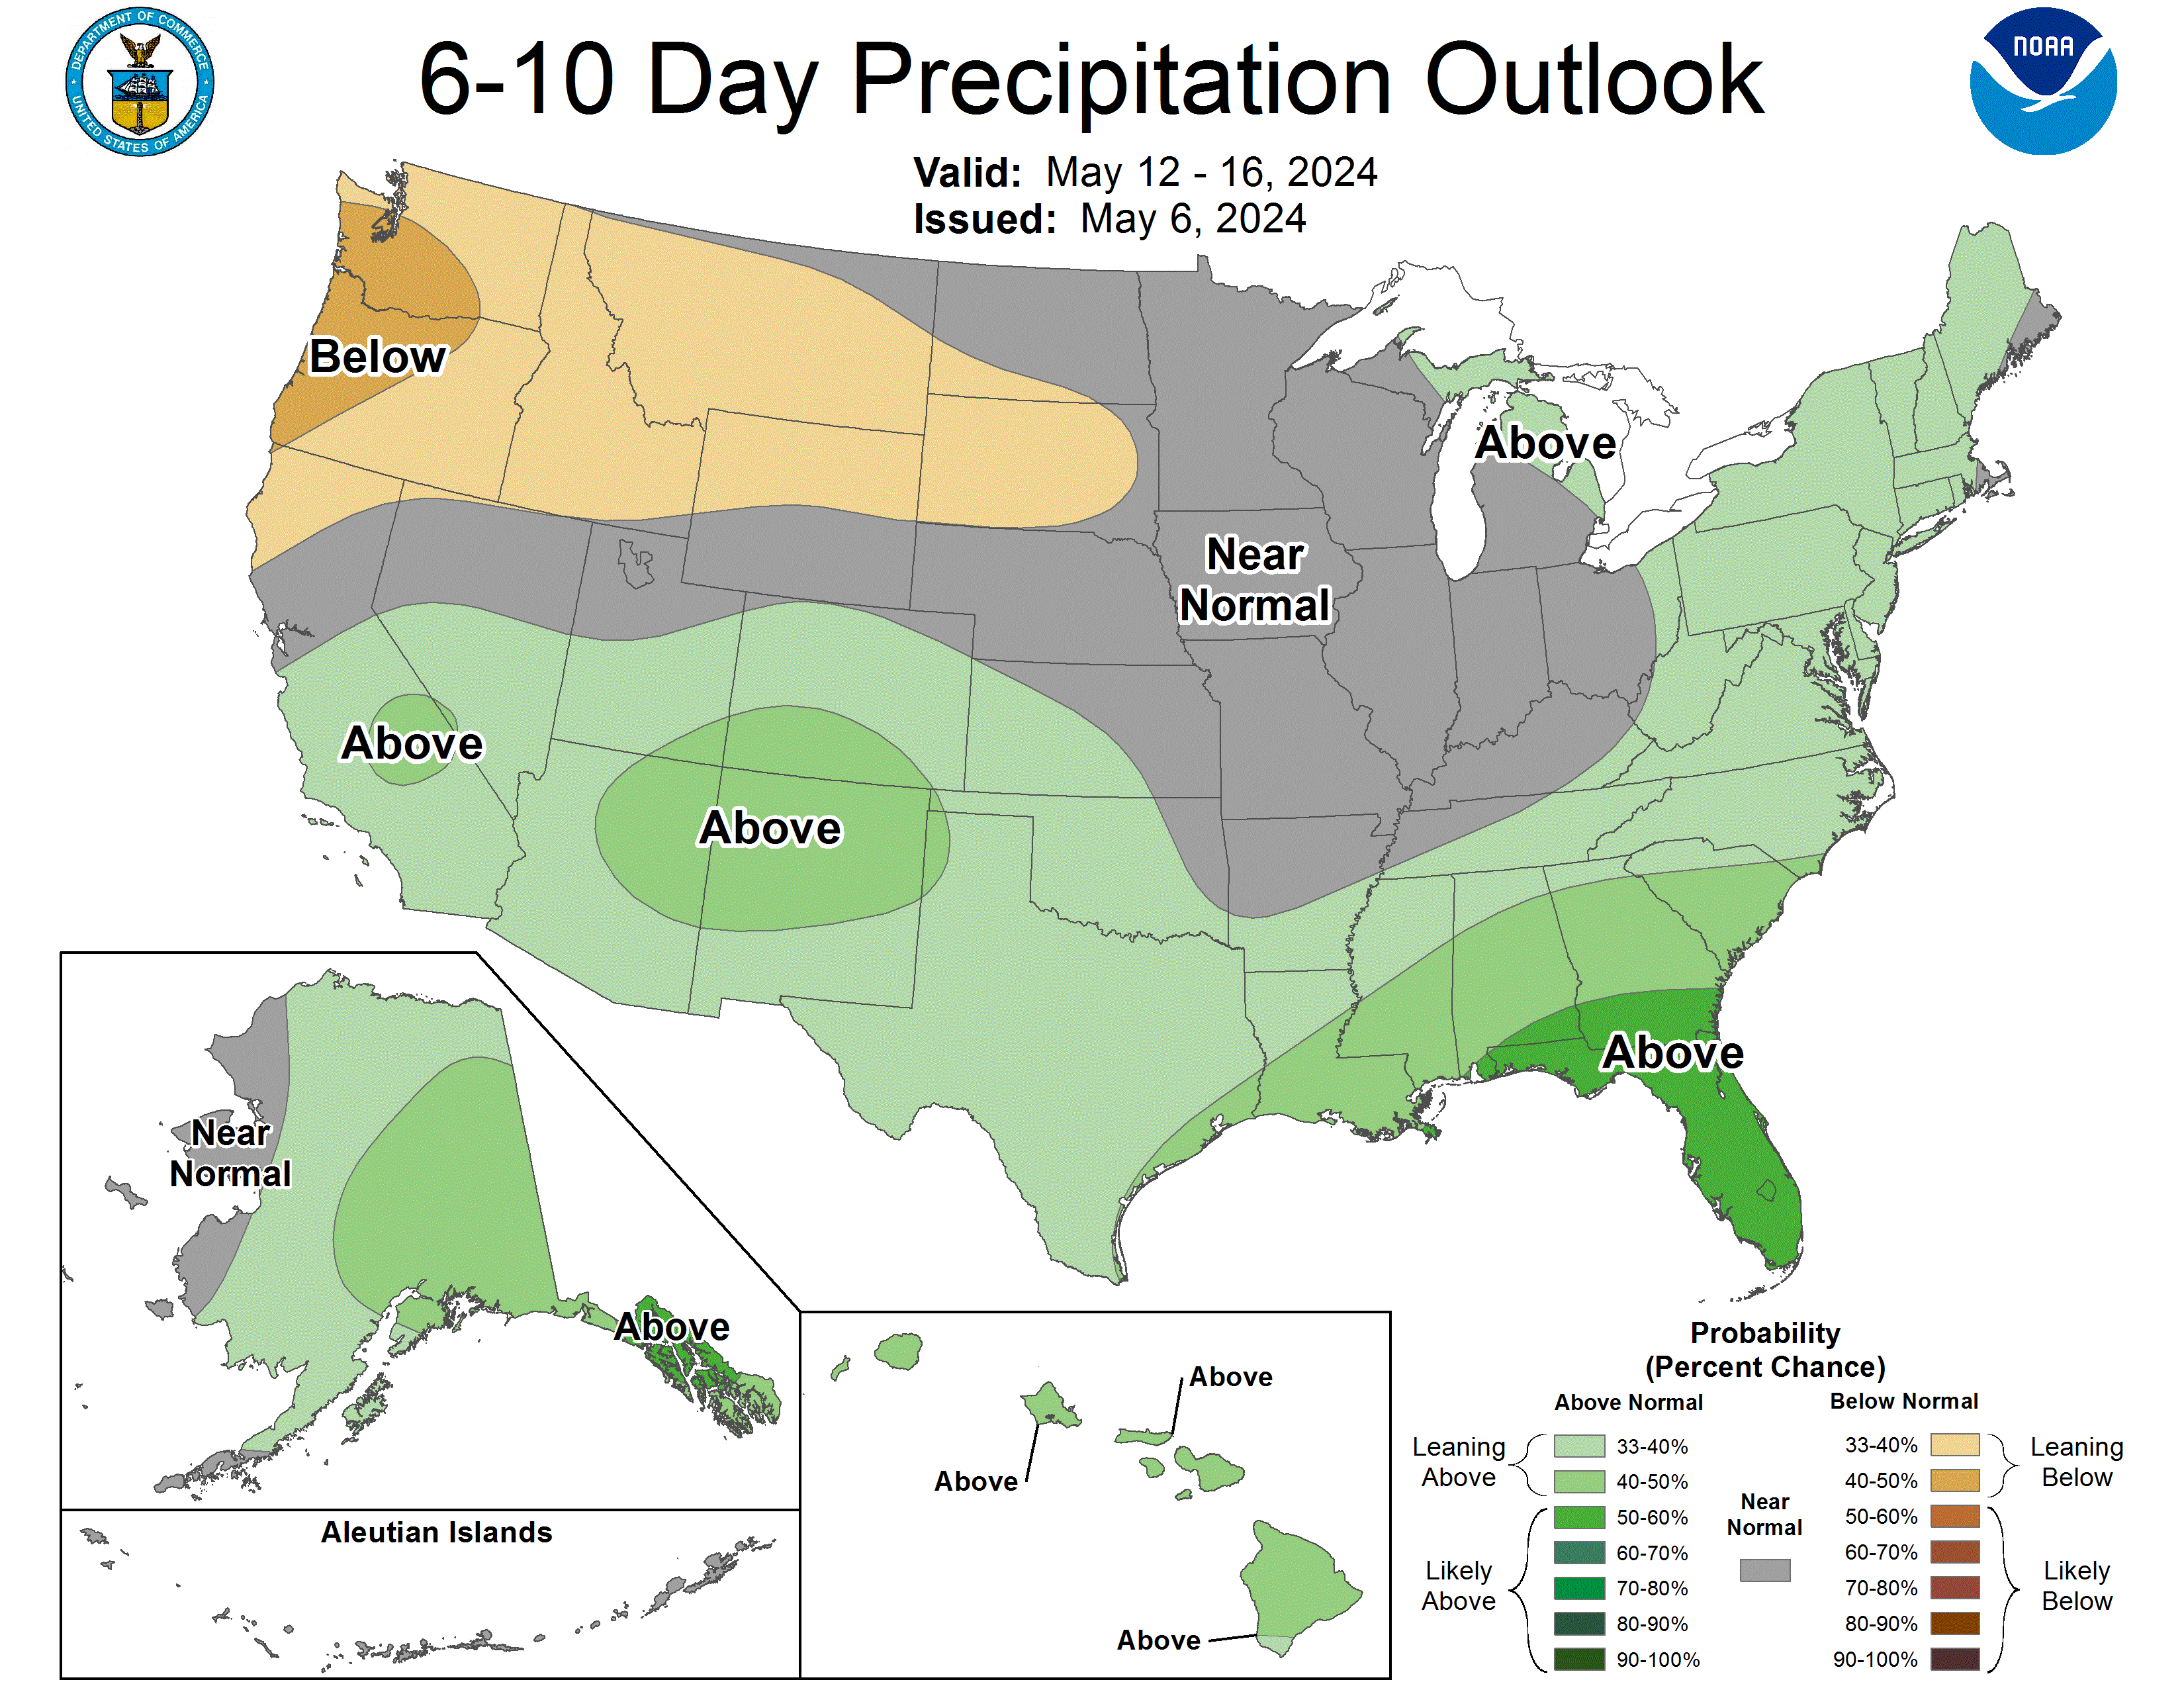 https://www.cpc.ncep.noaa.gov/products/predictions/610day/610prcp.new.gif